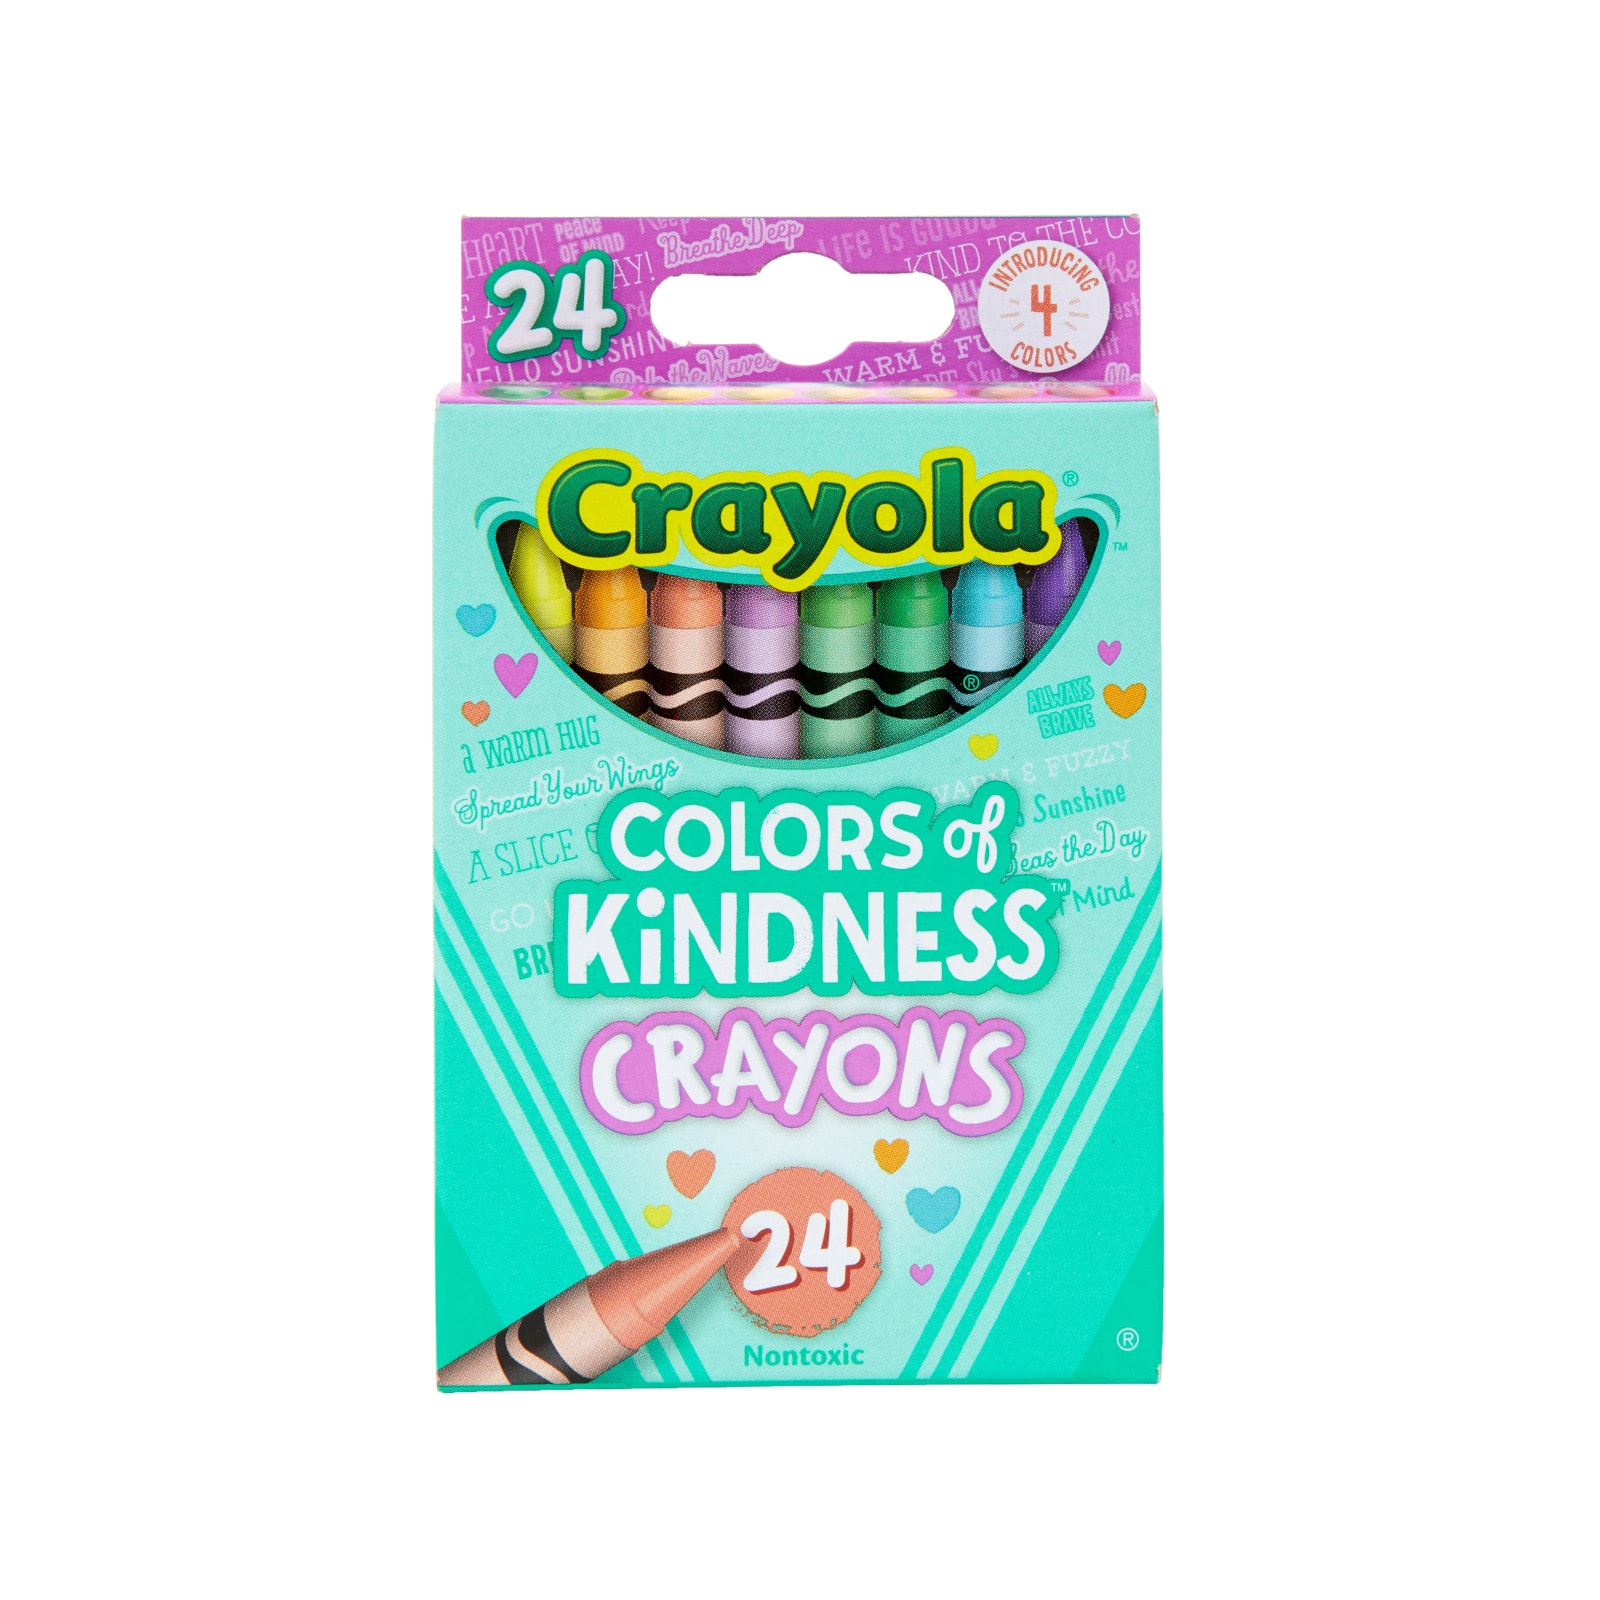 Get the My First Crayola® Washable Tripod Grip Crayons at Michaels.com